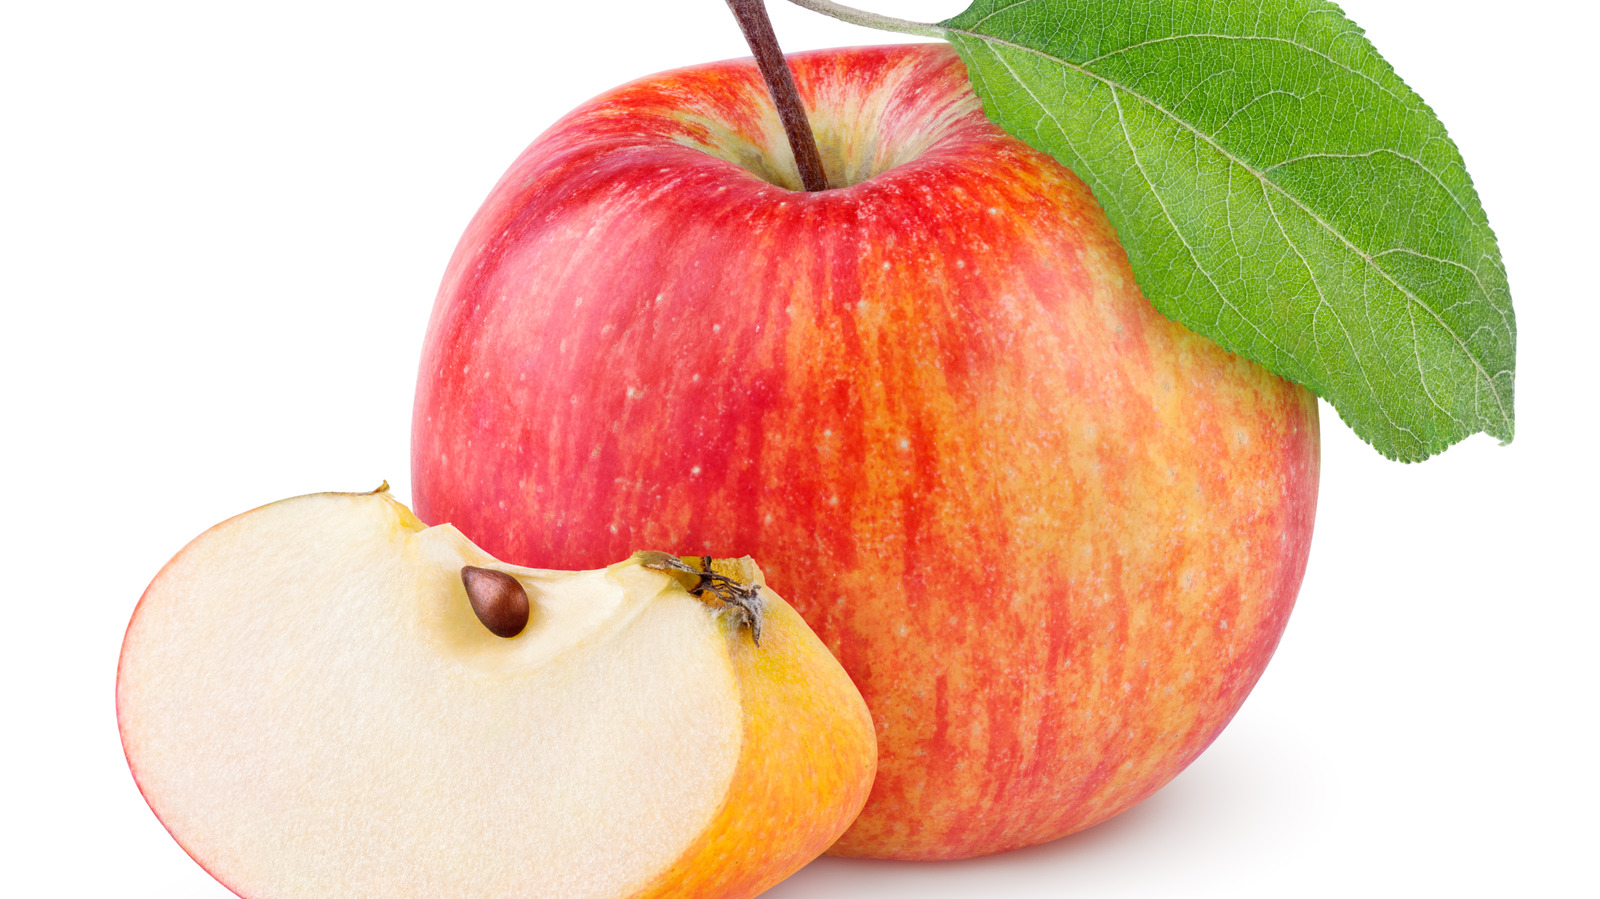 What Is The Healthiest Type Of Apple?